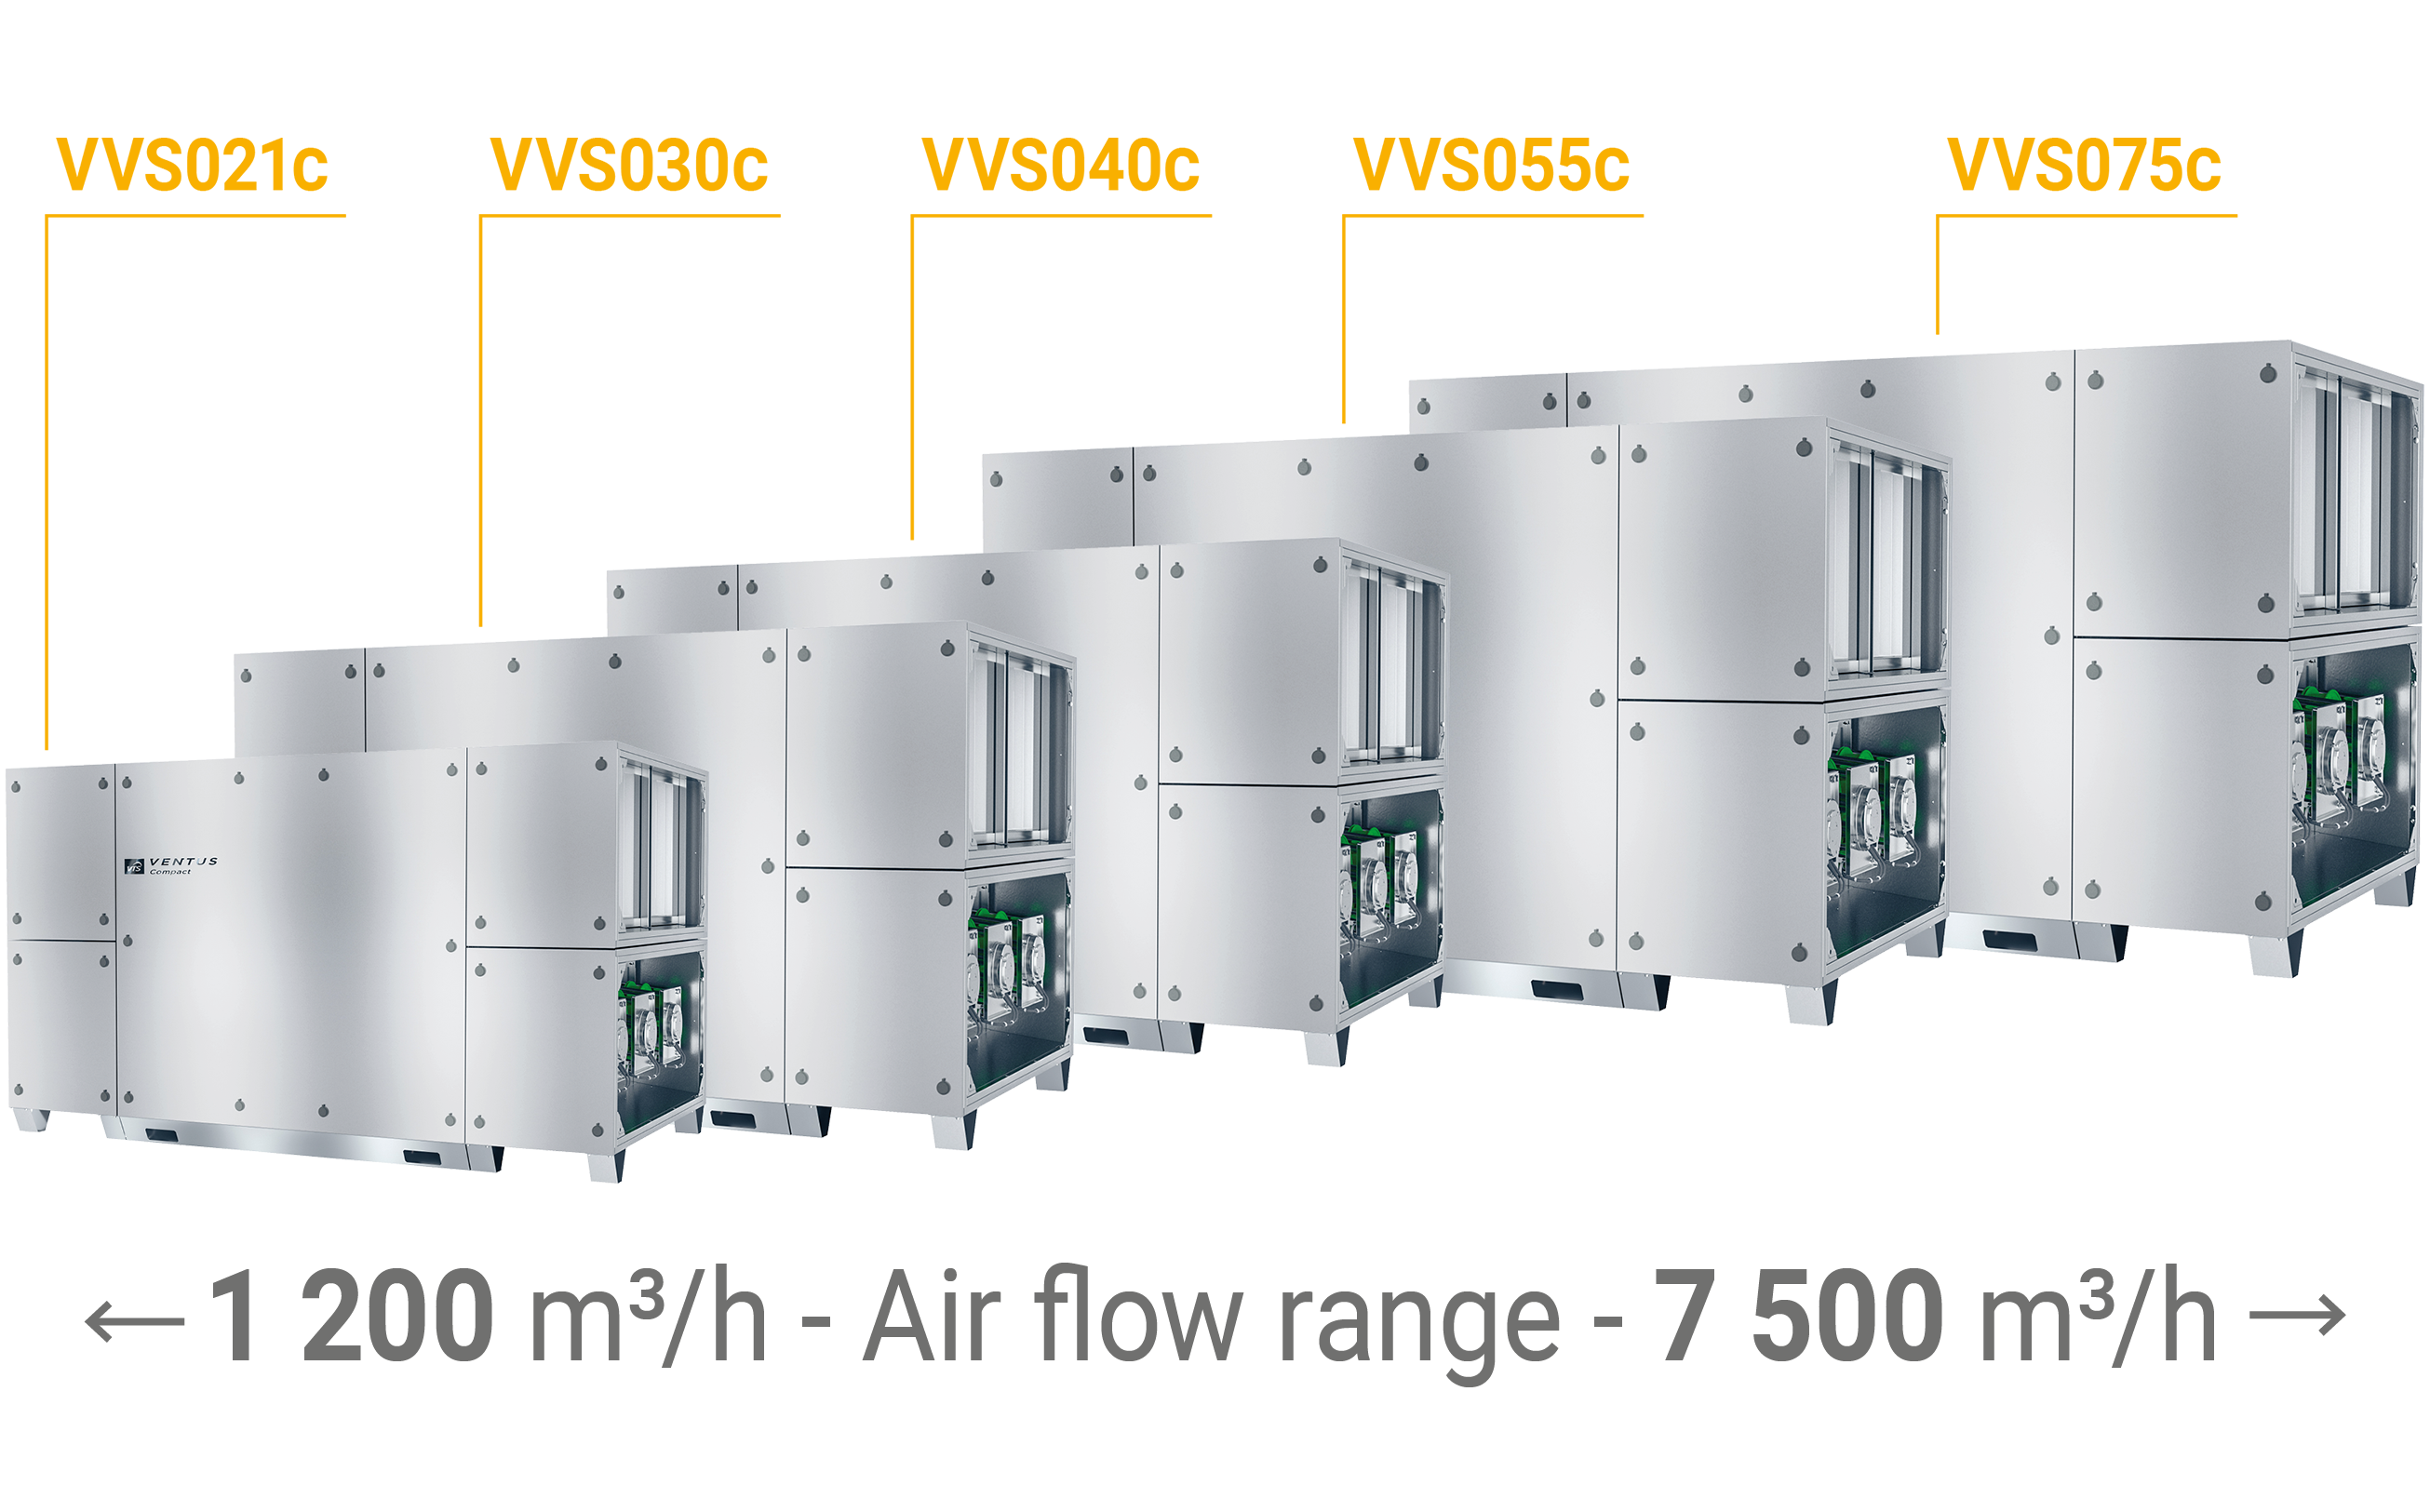 VENTUS Compact with heat pump - Compact air handling units with an integrated heat pump. 4